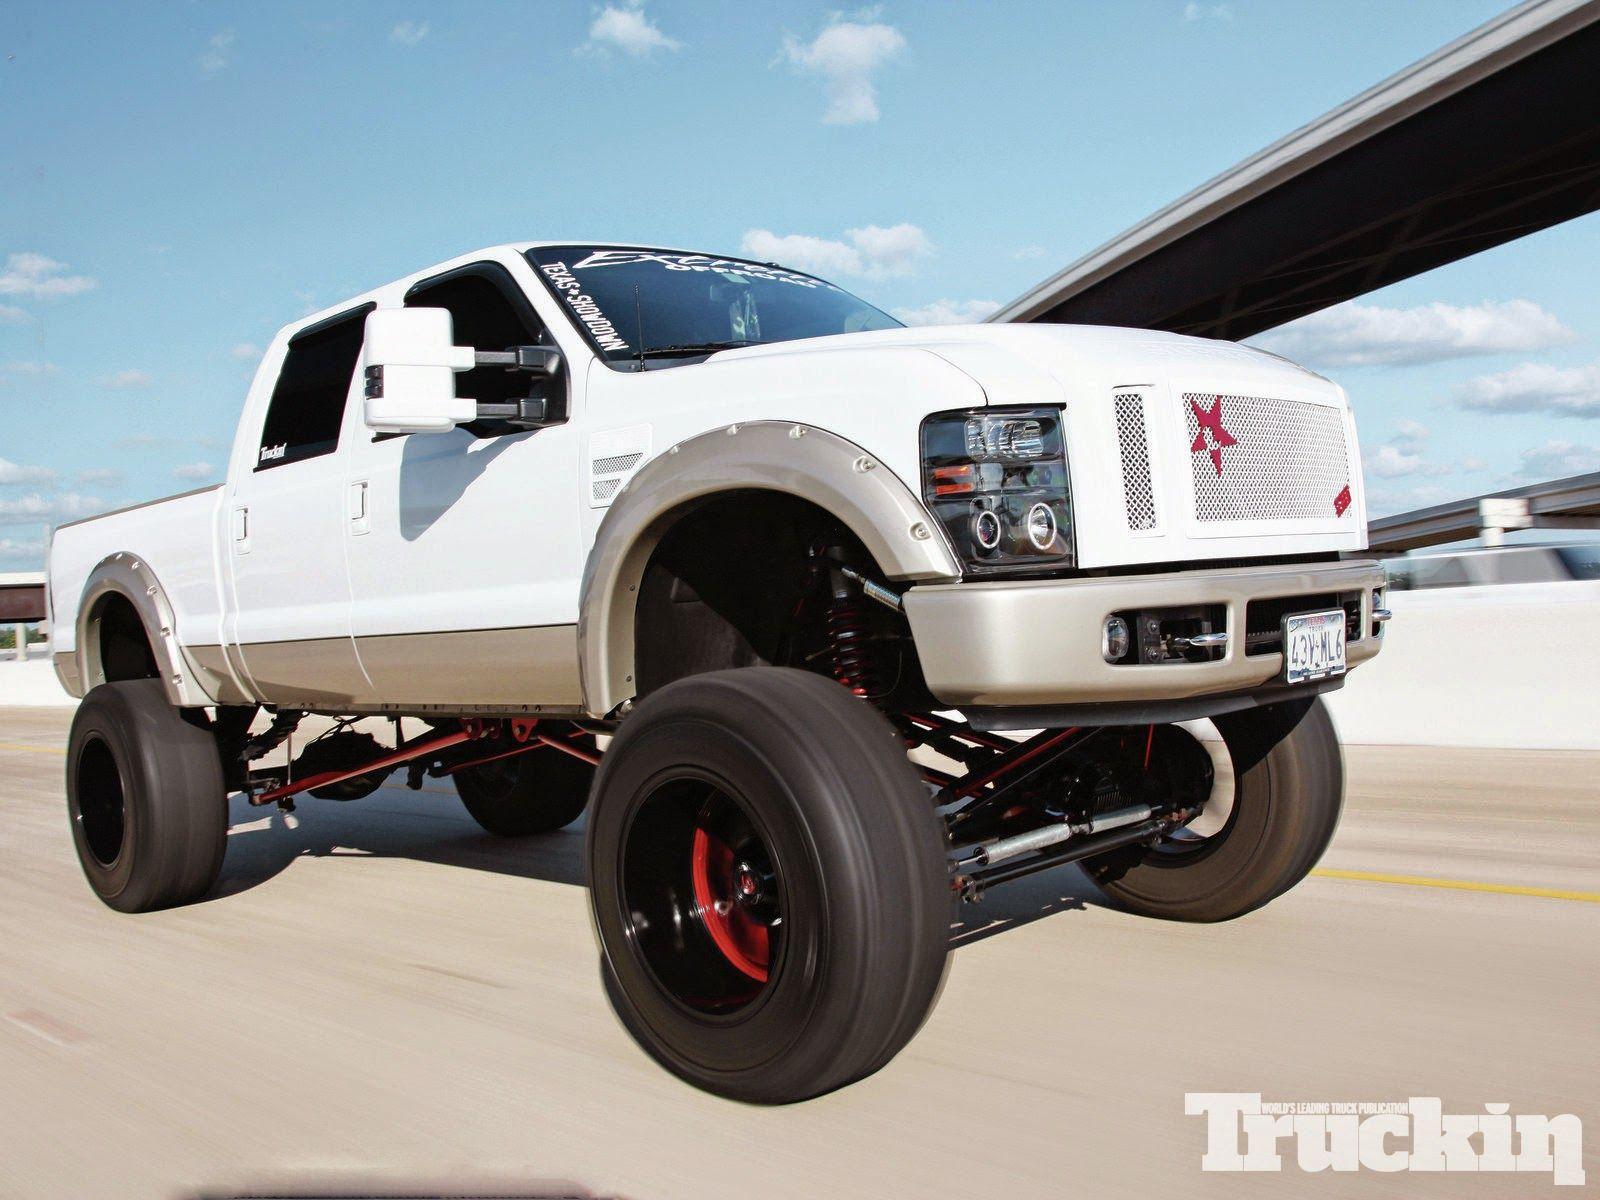 Lifted Chevy Truck Wallpaper 1599×1059 Lifted Truck Wallpaper